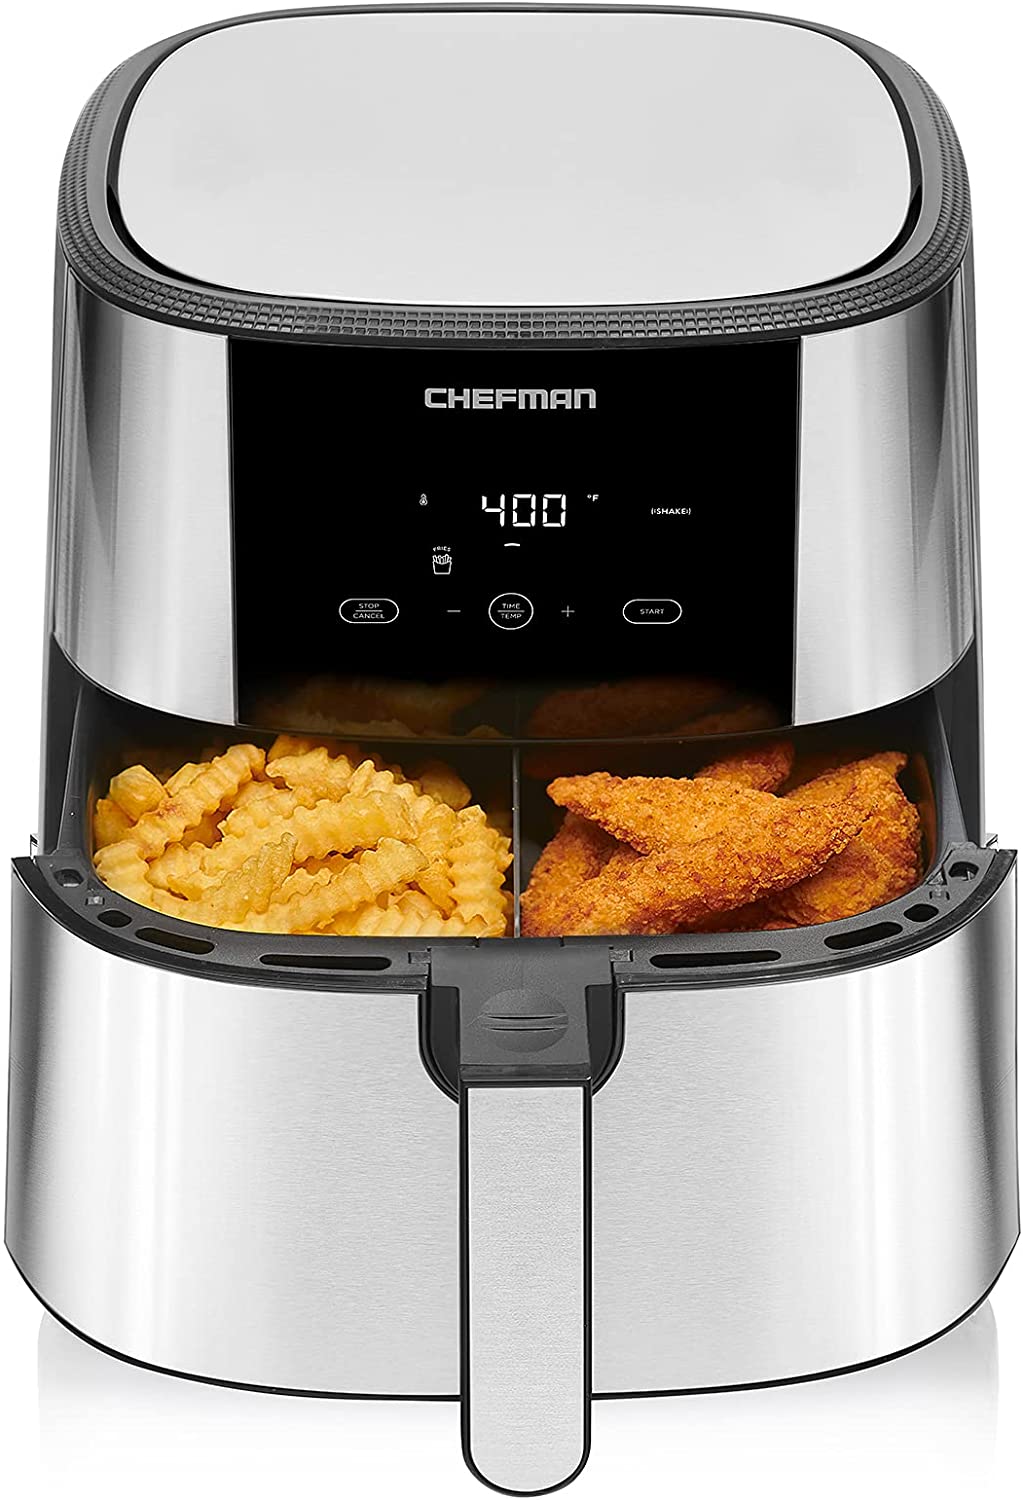 8-Qt Chefman 2-in-1 Max XL Air Fryer Digital Touch Screen w/ 4 Cooking Functions (Stainless Steel) $70 + Free Shipping